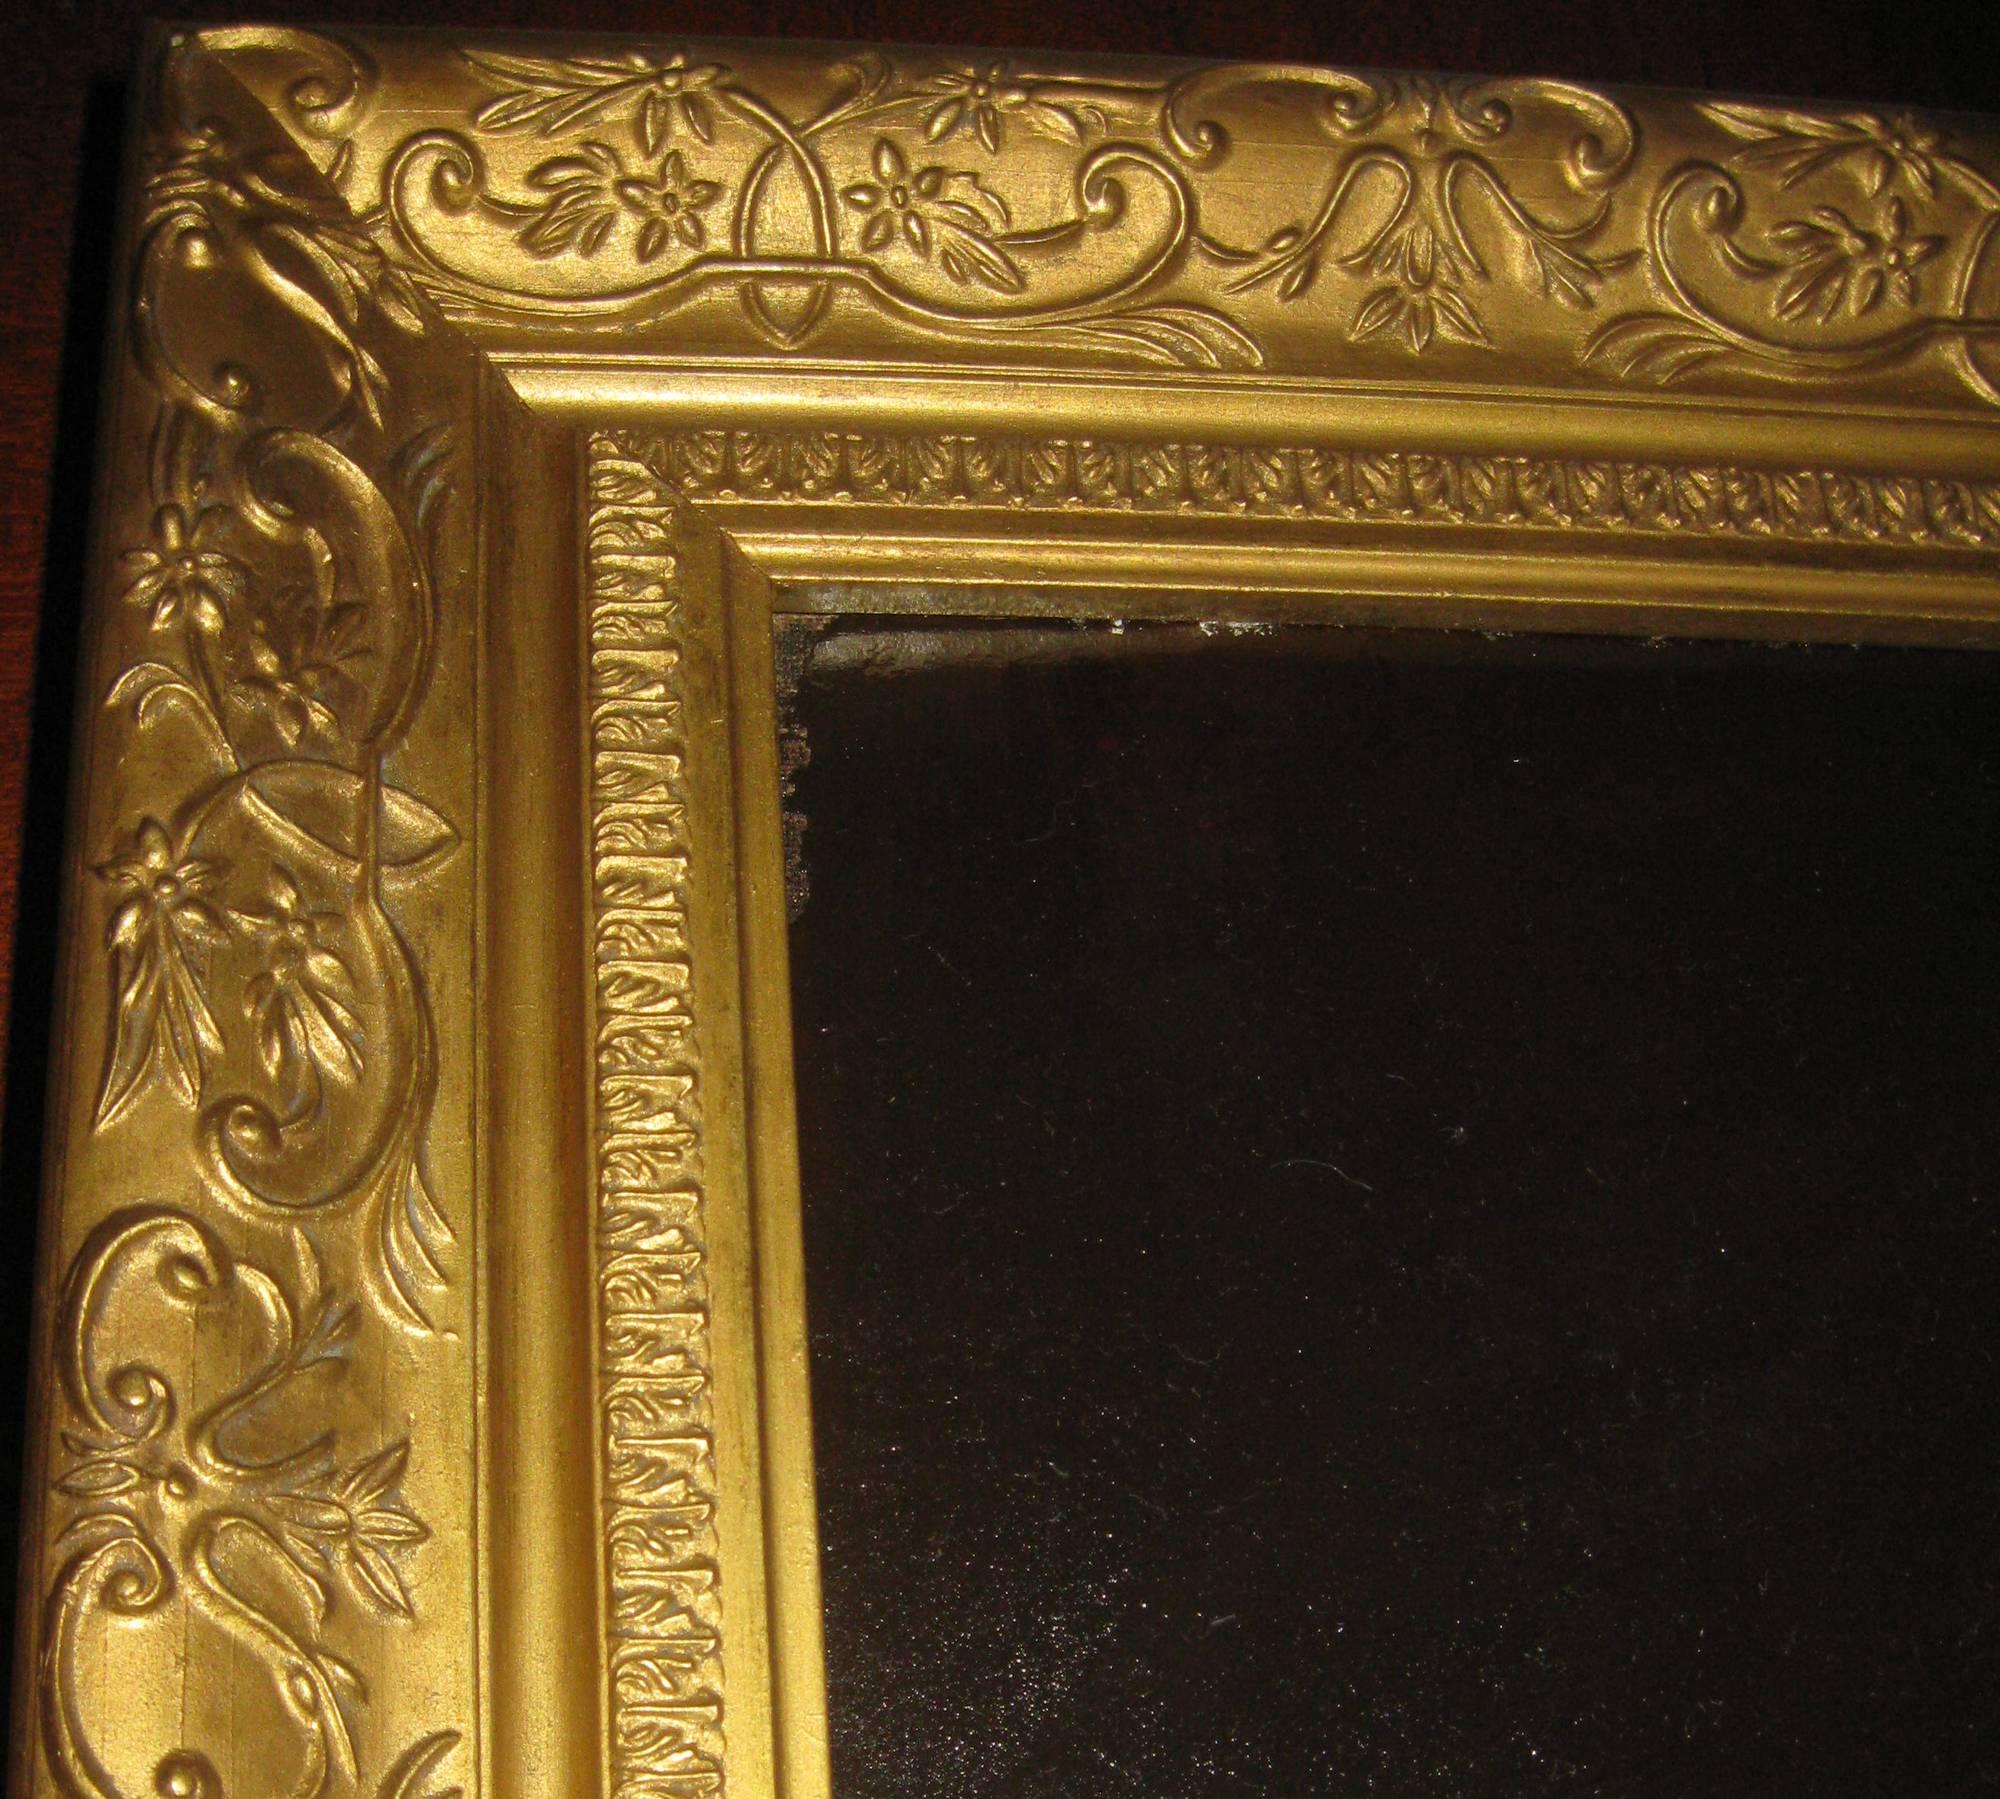 Unsigned oil painting featuring little girl holding a bunch of grapes. Whimsical and almost primitive presentation with contrasting antique decorative gold gilt frame. See measurements below.